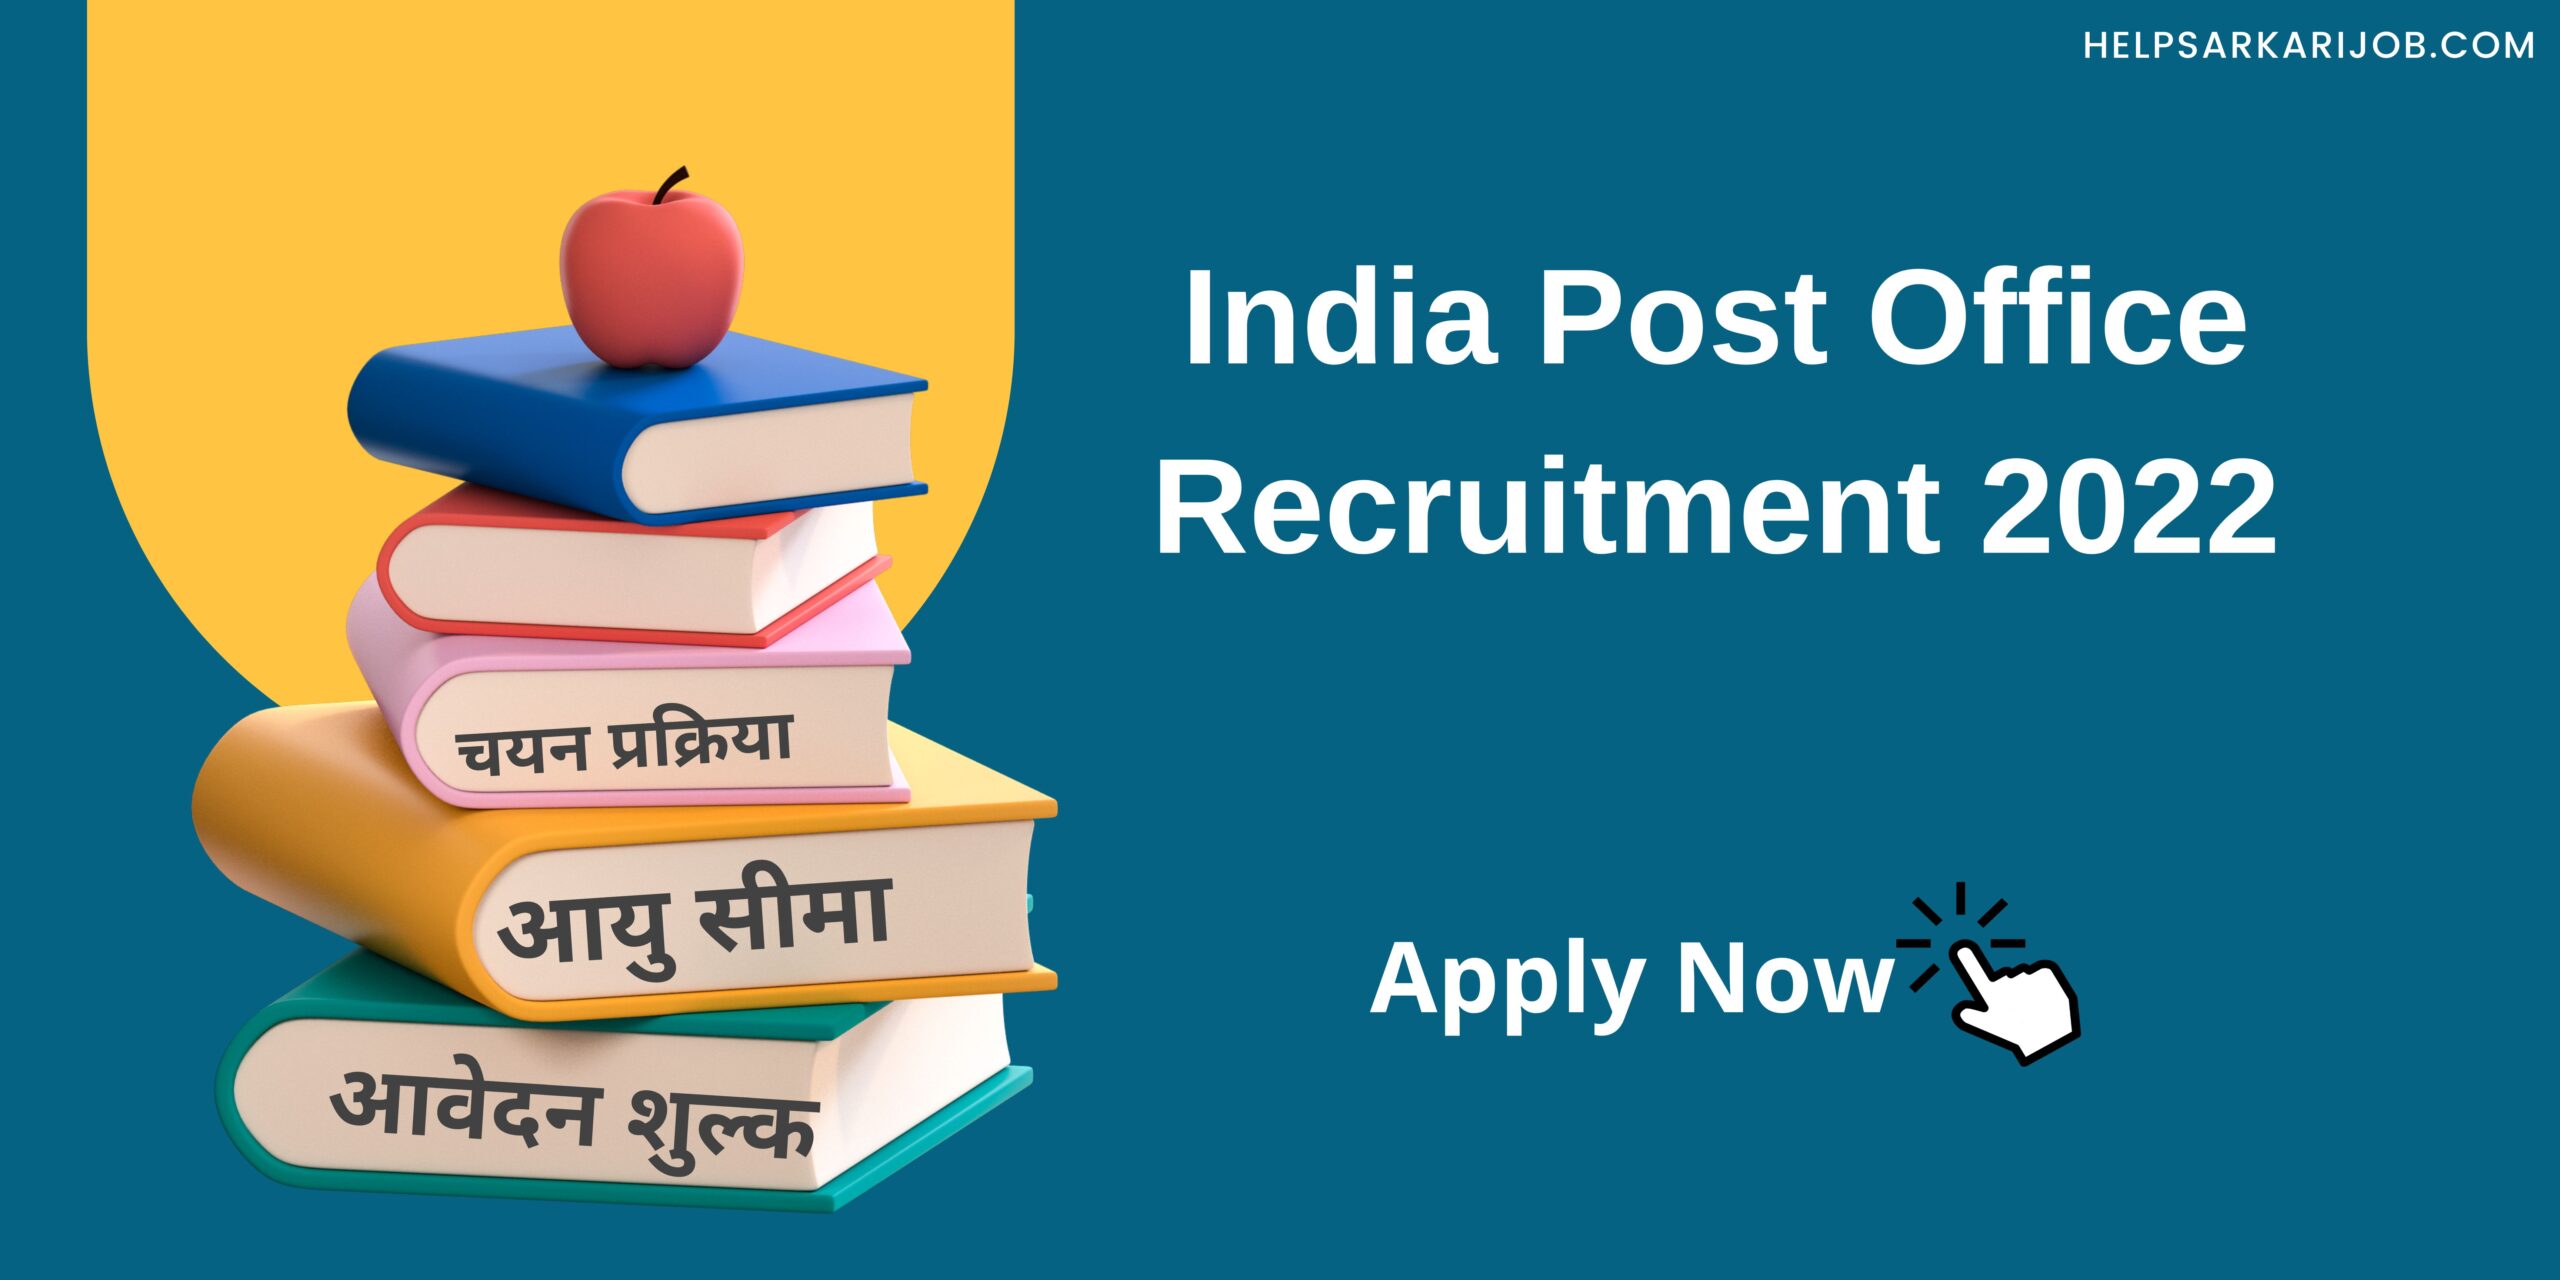 India Post Office Recruitment 2022 scaled -